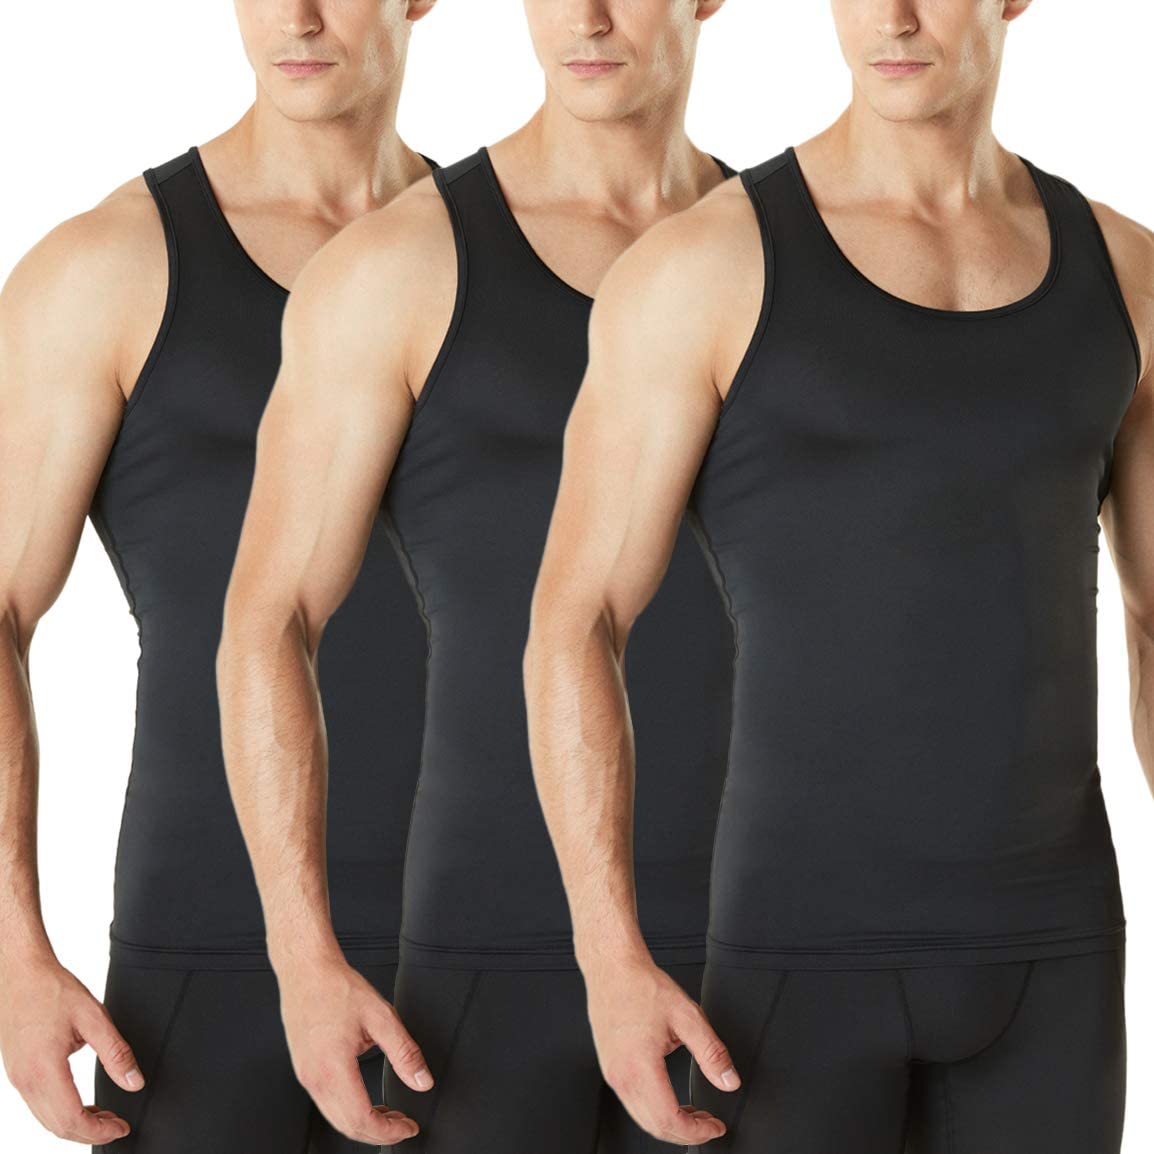 Performance Athletic Muscle Shirts TSLA 1 or 3 Pack Mens Sleeveless Running Tank Top Dry Fit Workout Gym Tank Tops